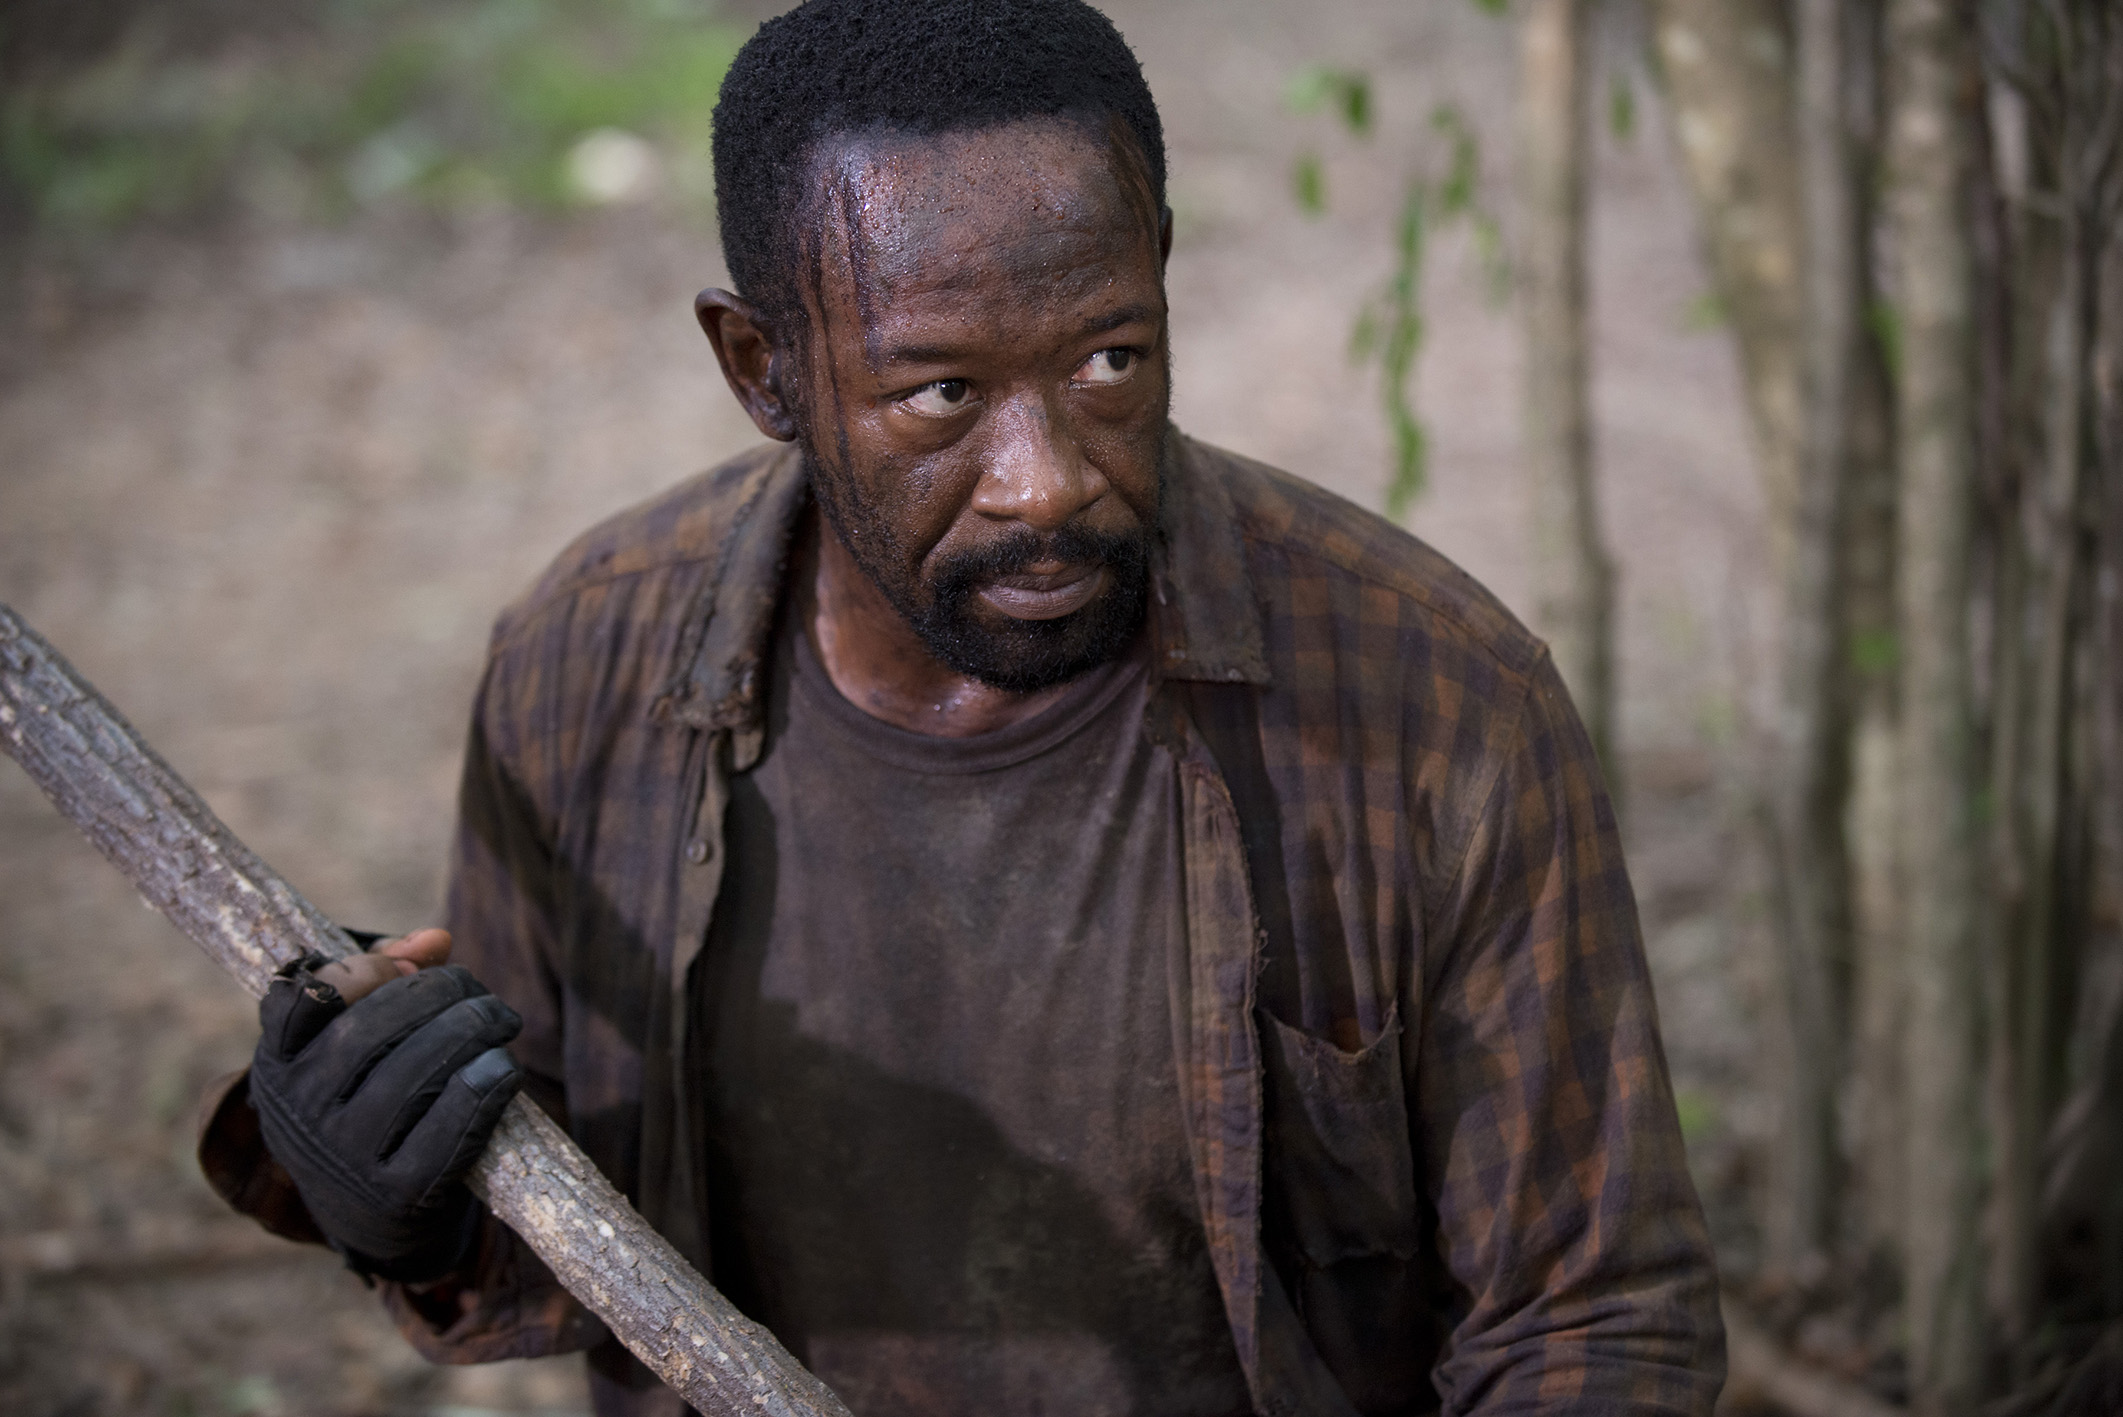 Walking Dead Season 6 Episode 4 'Here's Not Here' review - SciFiNow